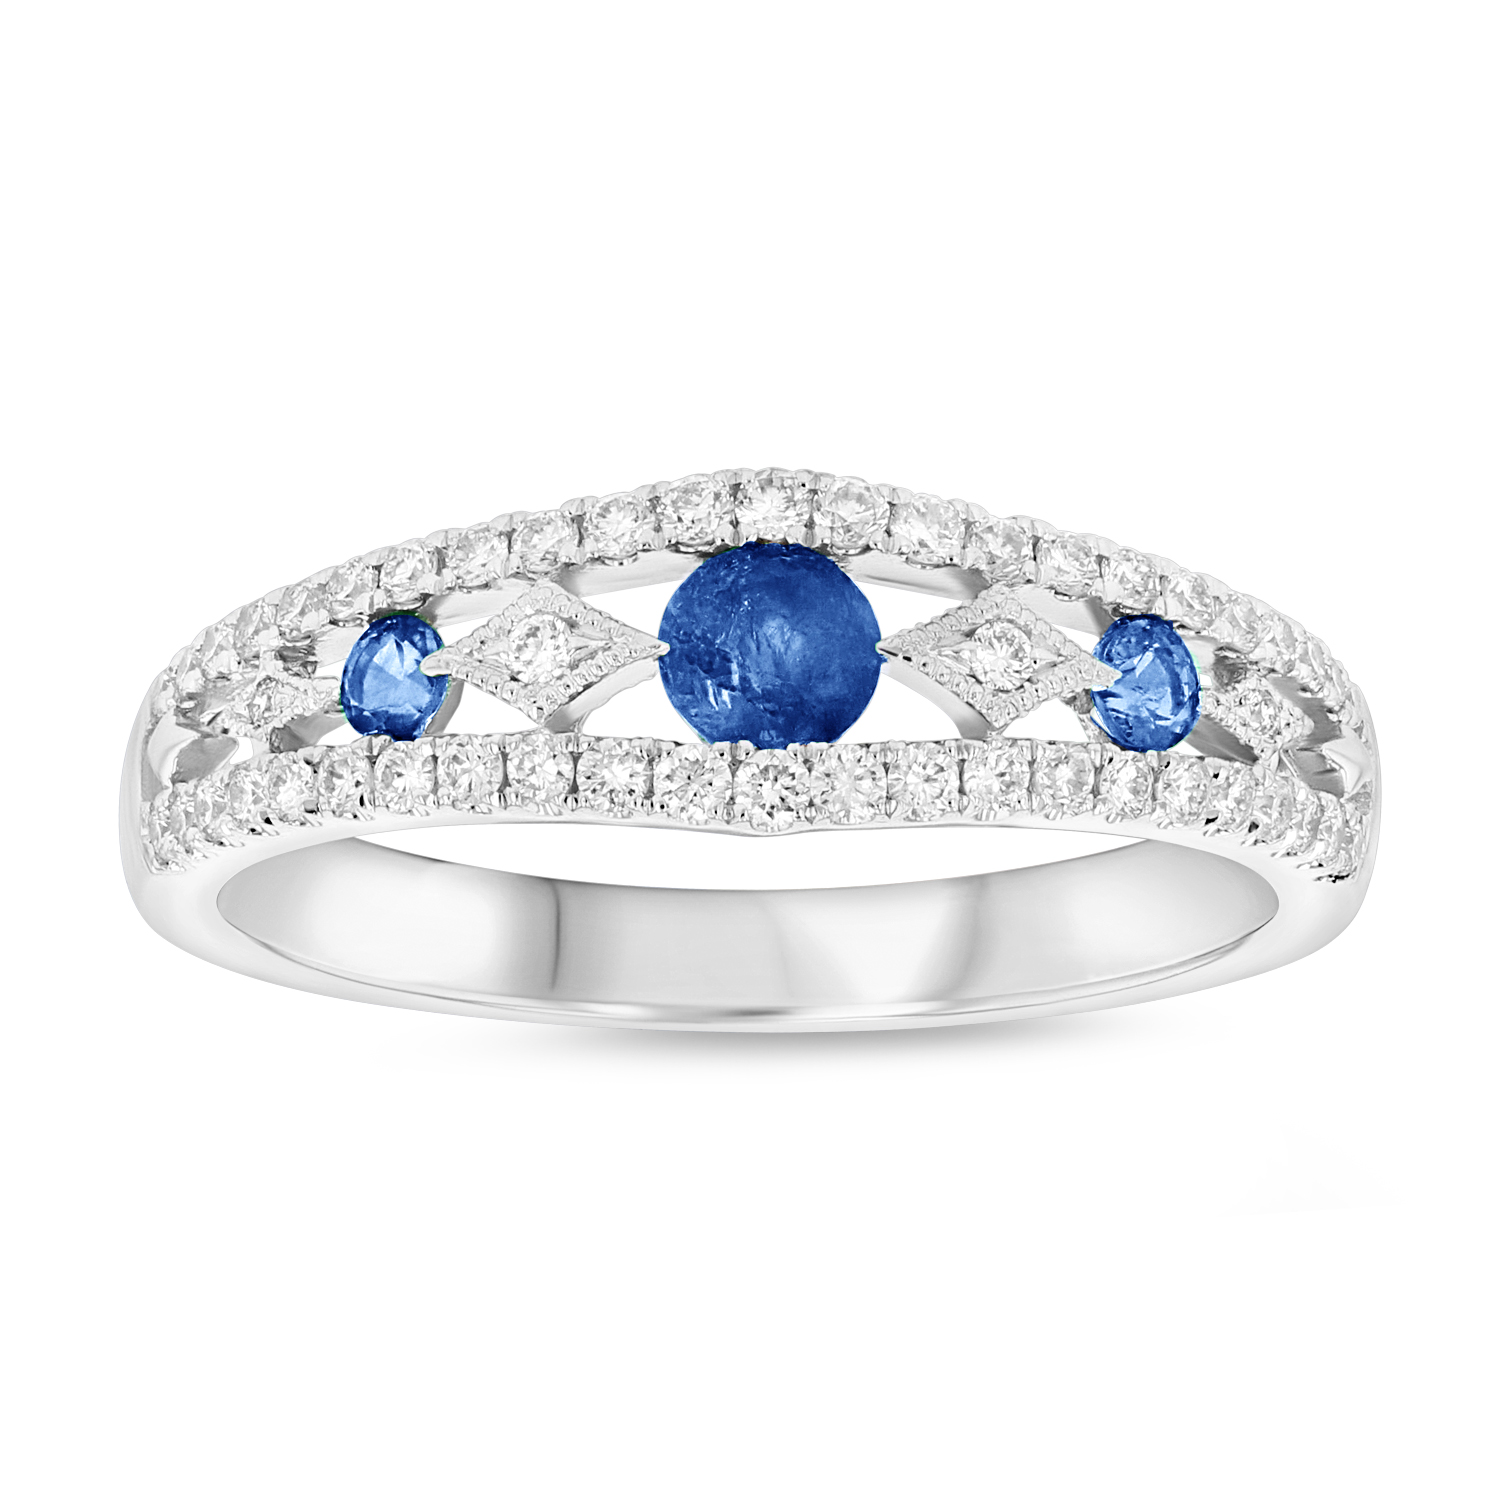 View Diamond and Sapphire Band in 14k White Gold